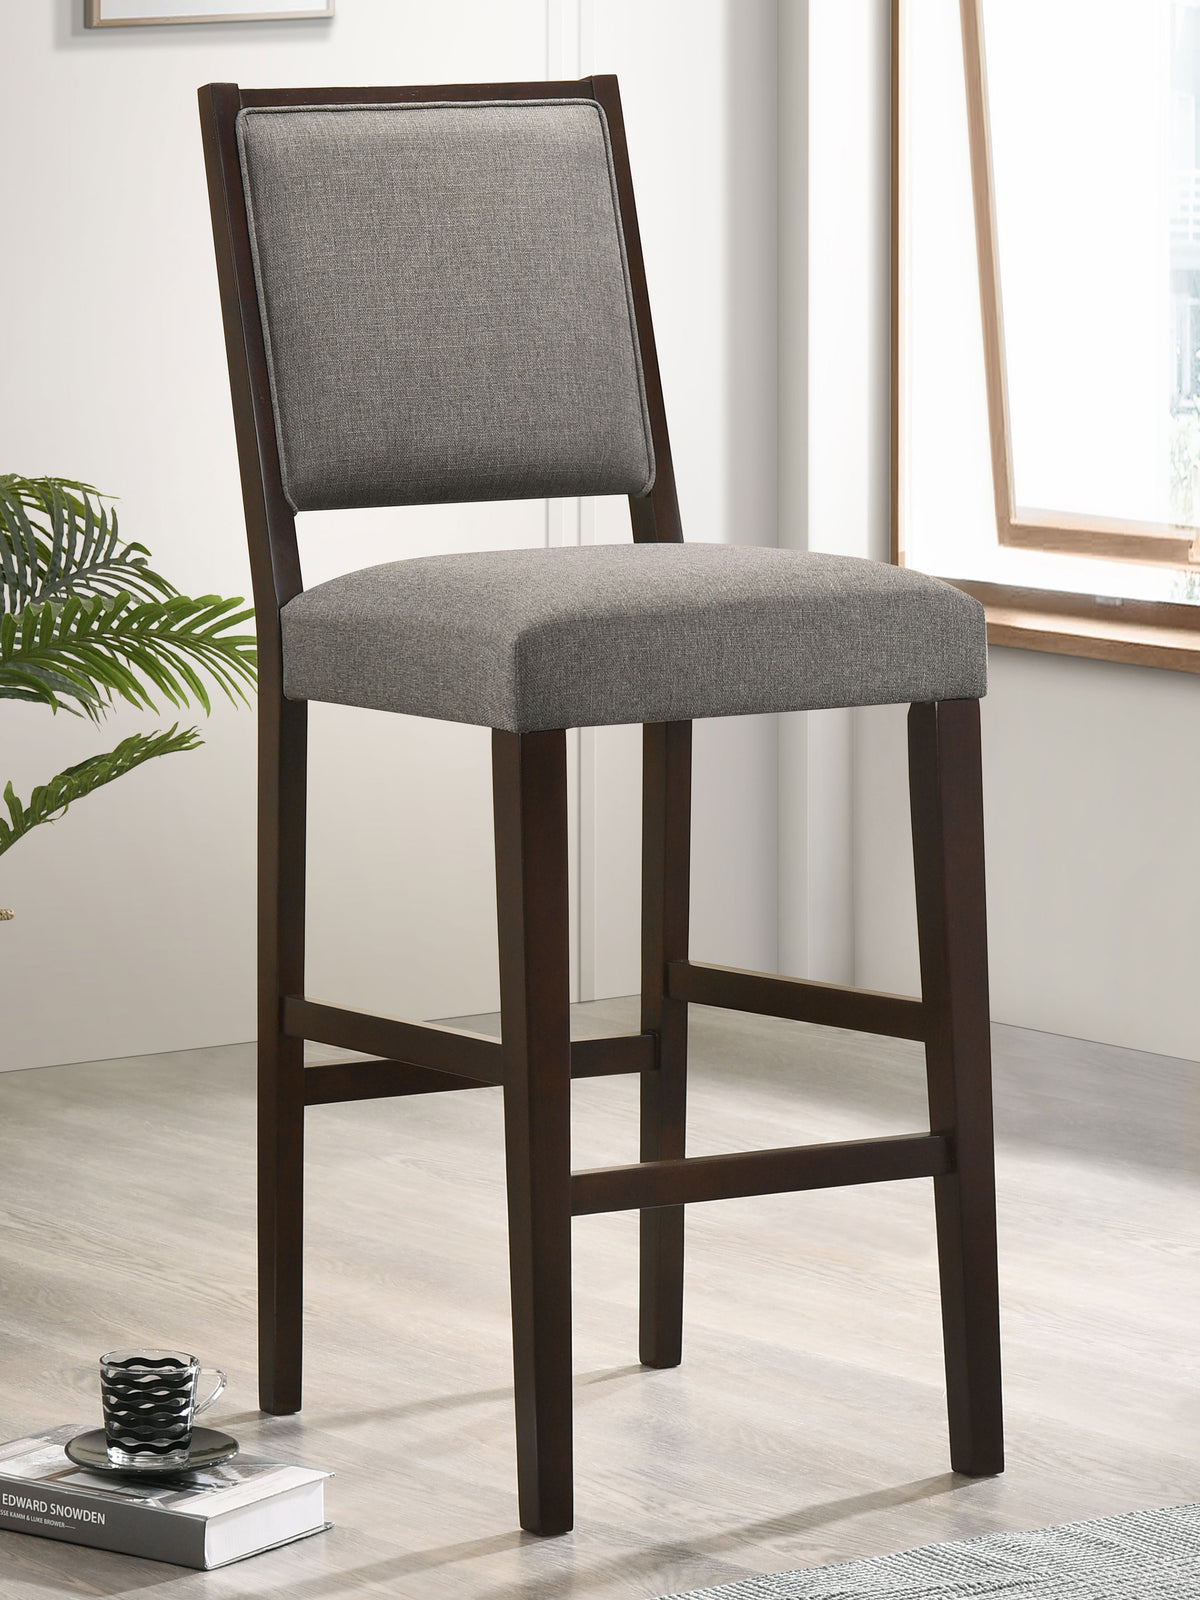 Bedford Upholstered Open Back Bar Stools with Footrest (Set of 2) Grey and Espresso Bedford Upholstered Open Back Bar Stools with Footrest (Set of 2) Grey and Espresso Half Price Furniture